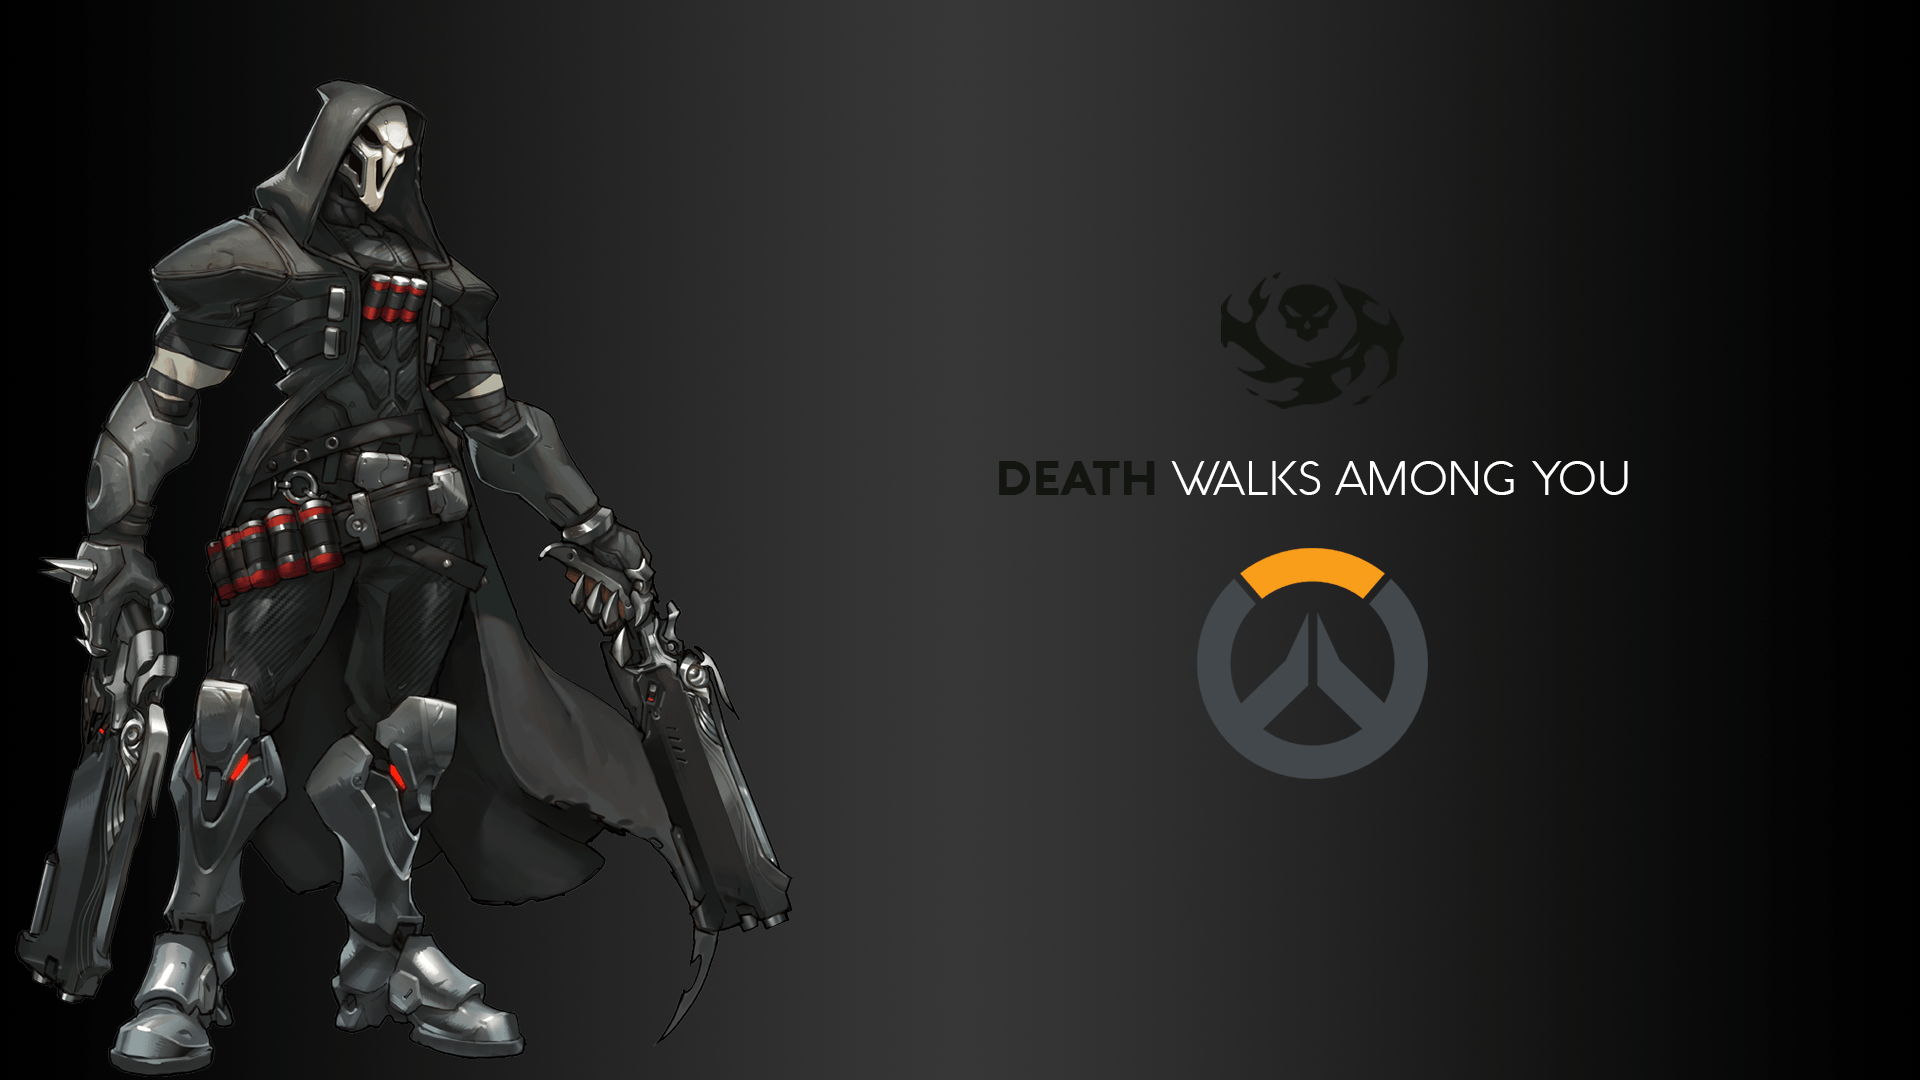 Download wallpapers Reaper 4k violet neon lights Overwatch creative  Overwatch characters Reaper Overwatch for desktop with resolution  3840x2400 High Quality HD pictures wallpapers